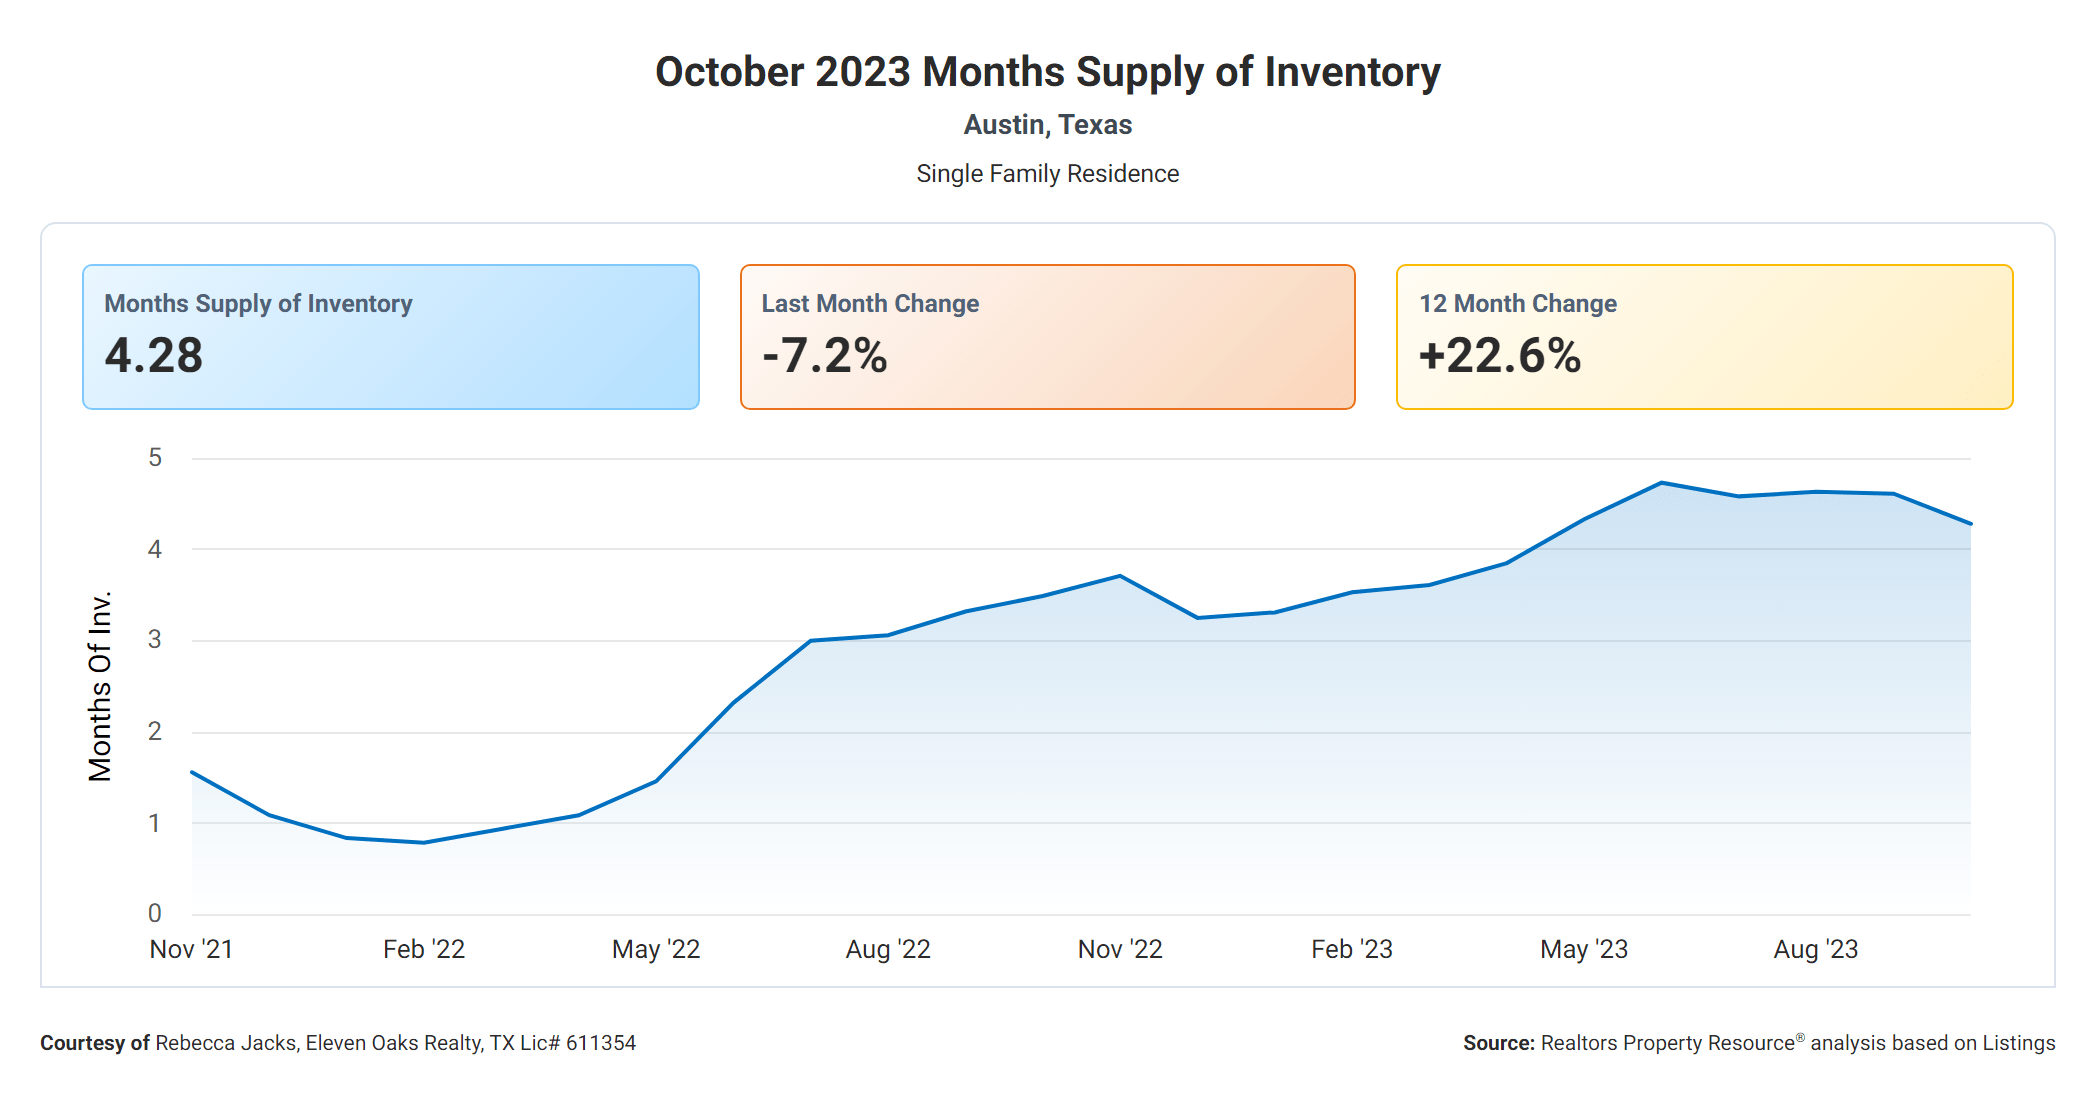 October 2023 Austin months supply of inventory